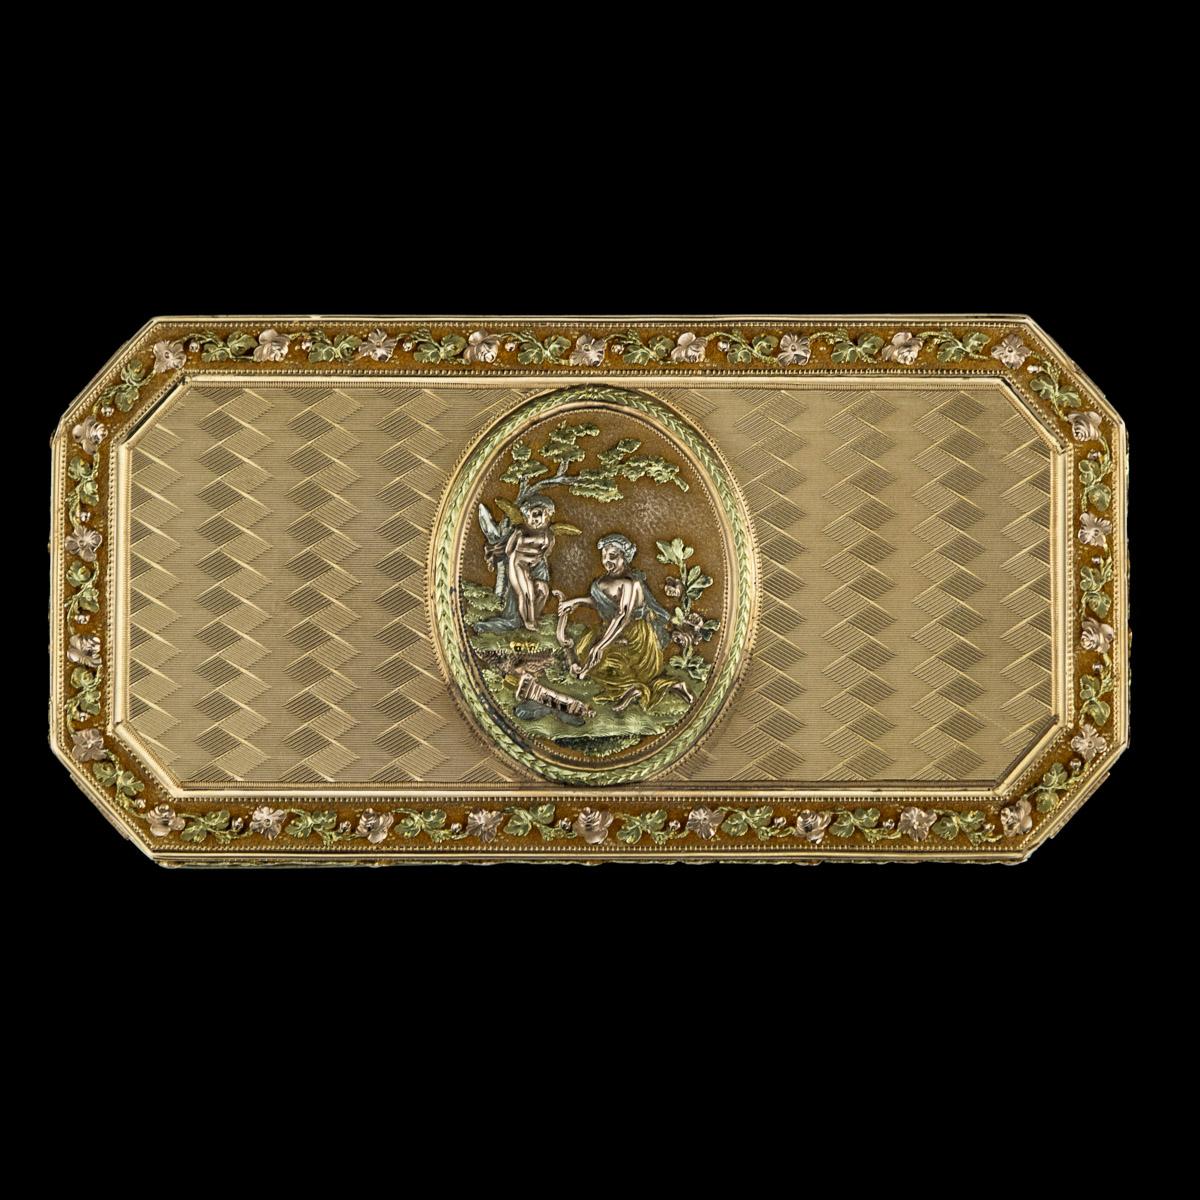 19th century Swiss three-colored 18-karat gold snuff box, rectangular shaped with canted corners, the cover, sides and base set with panels of chevron-pattern engine-turning, the four corners chased with varicolored gold urns draped with laurel